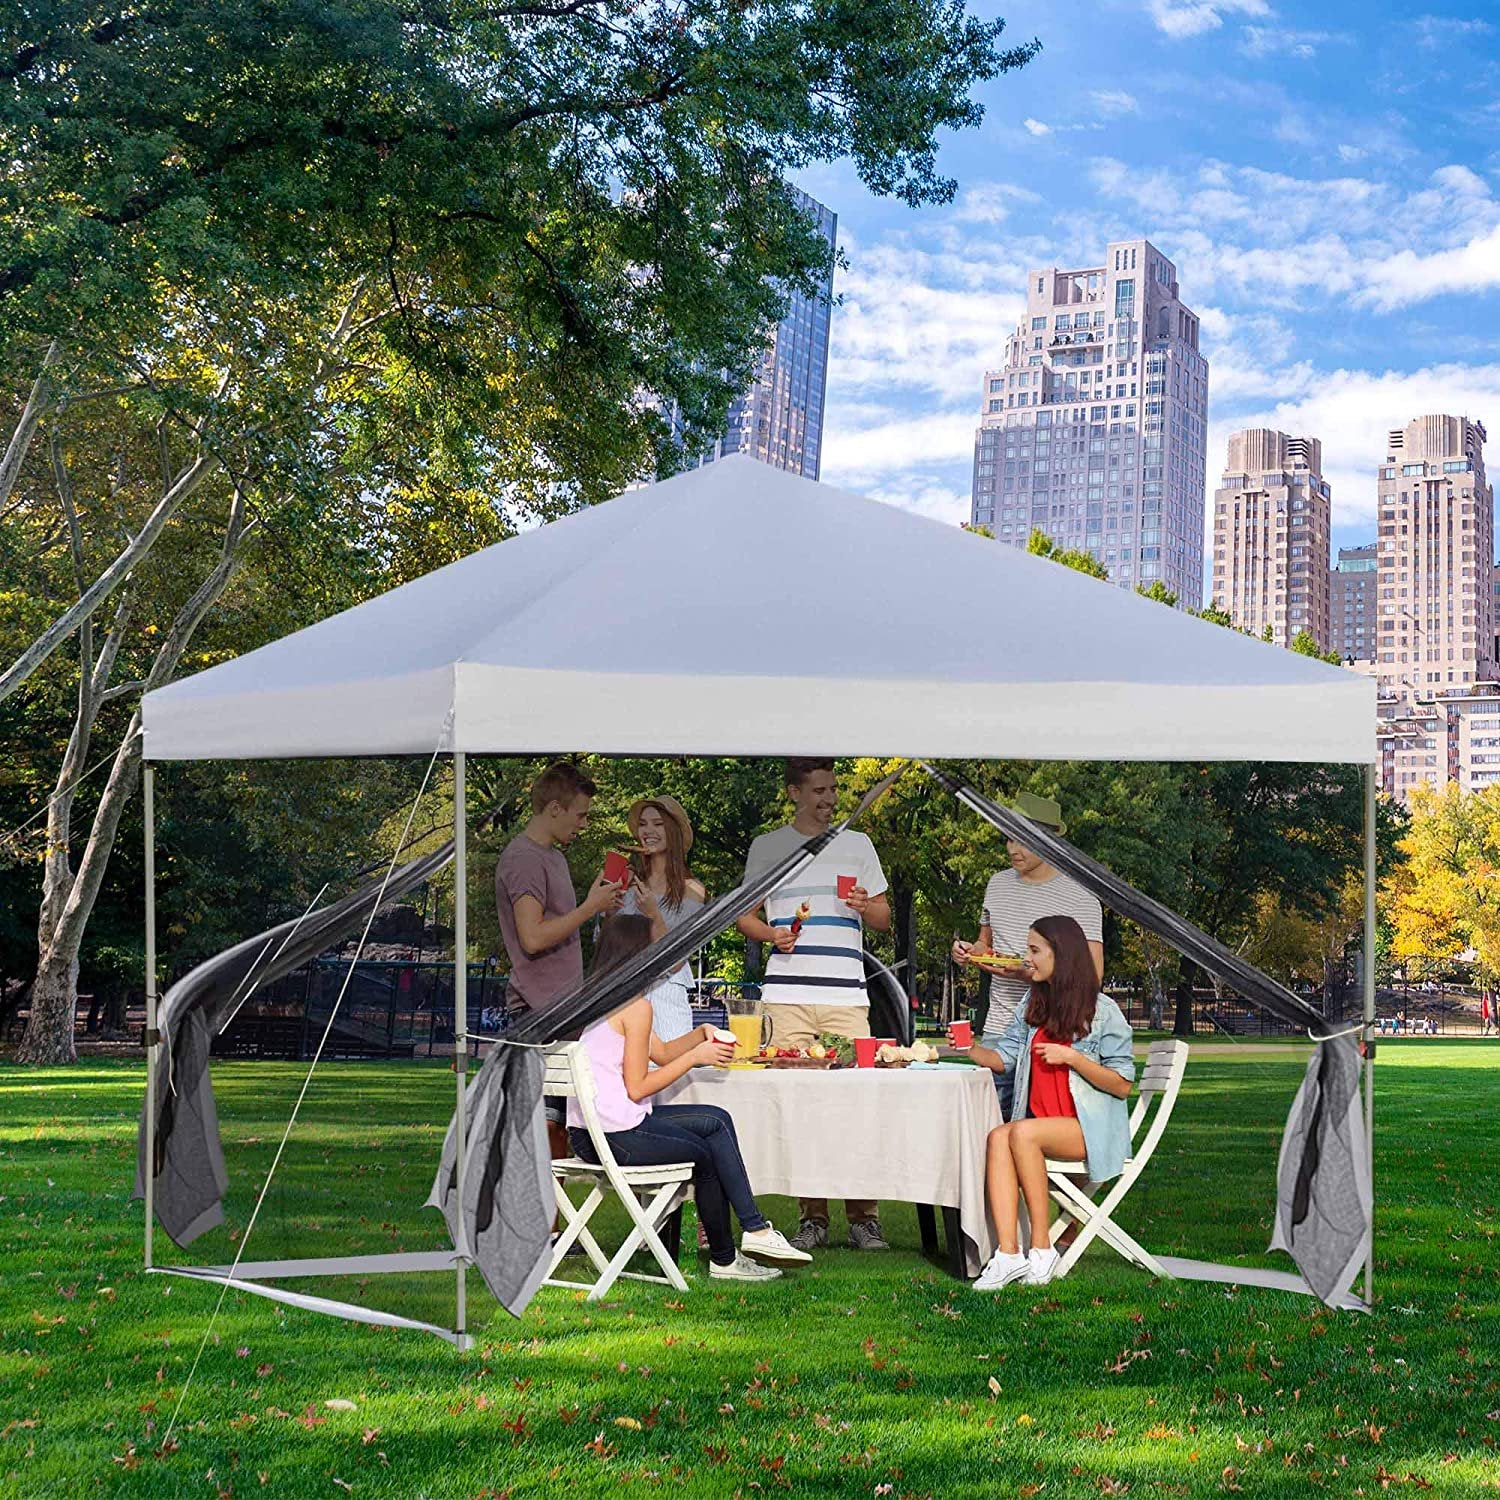 SUGIFT 10 ft. x 10 ft. White Gazebo Pop Up Canopy with Mesh Curtains